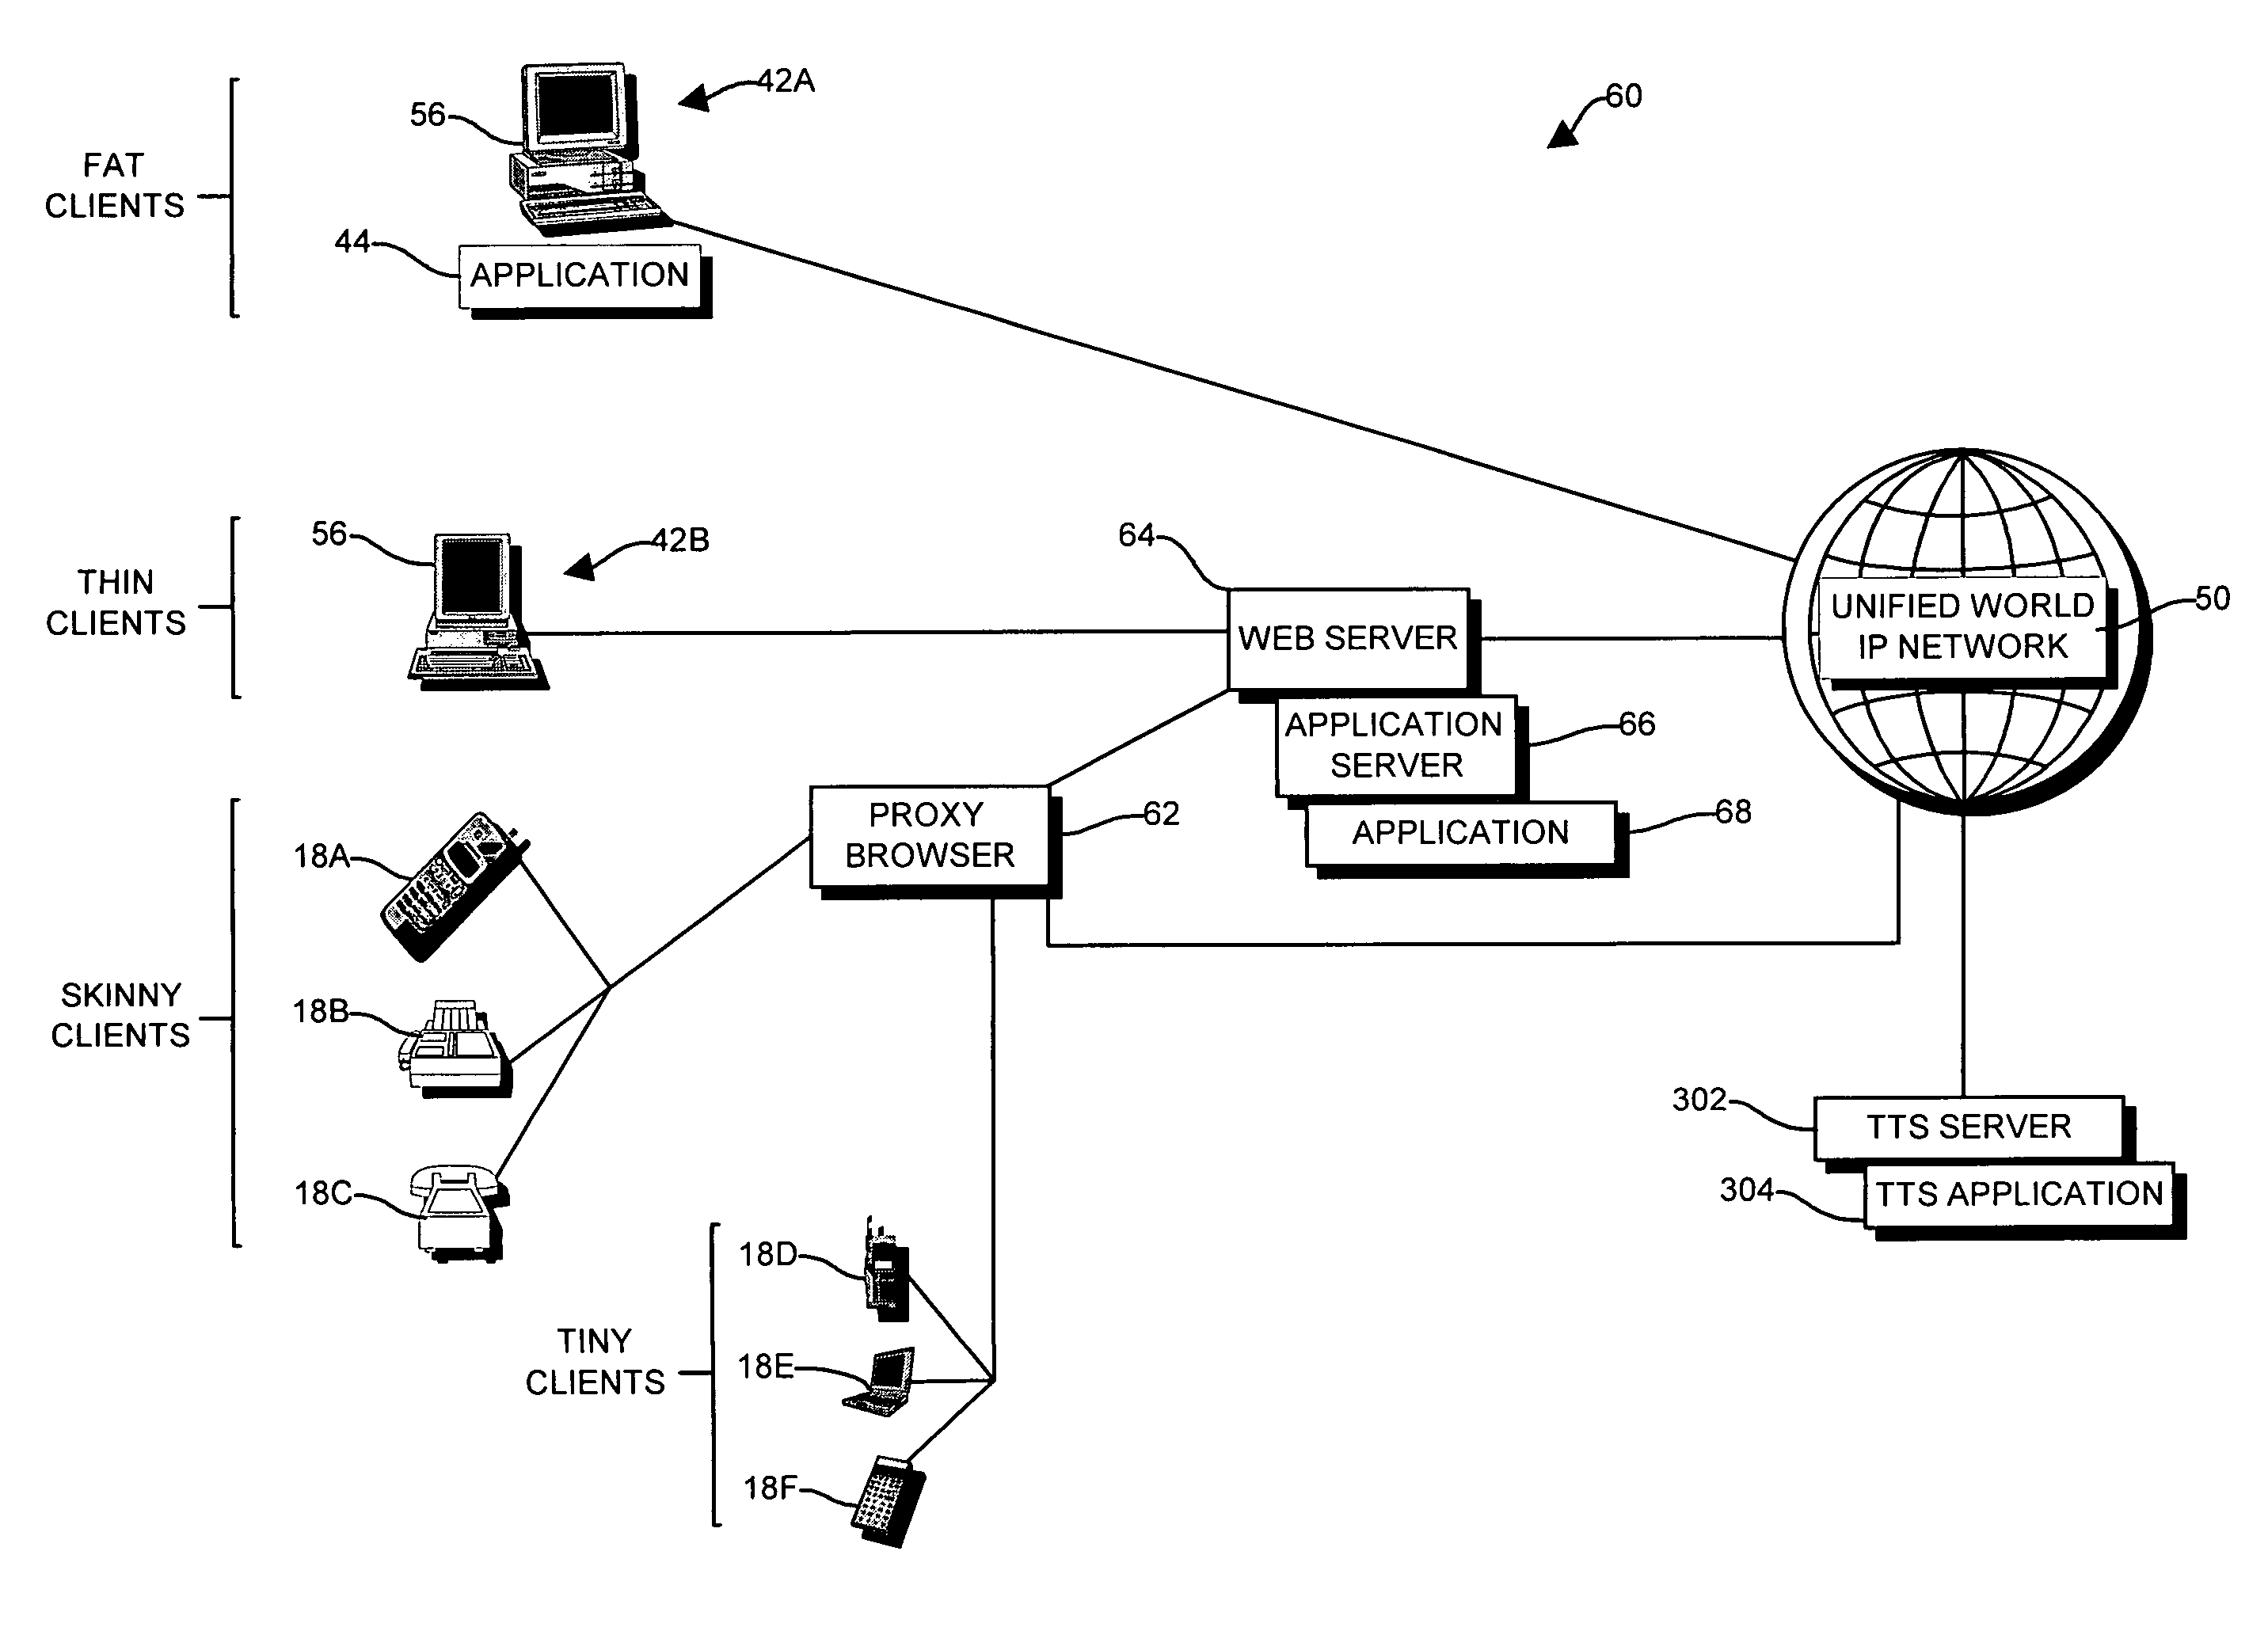 Apparatus and methods for converting textual information to audio-based output